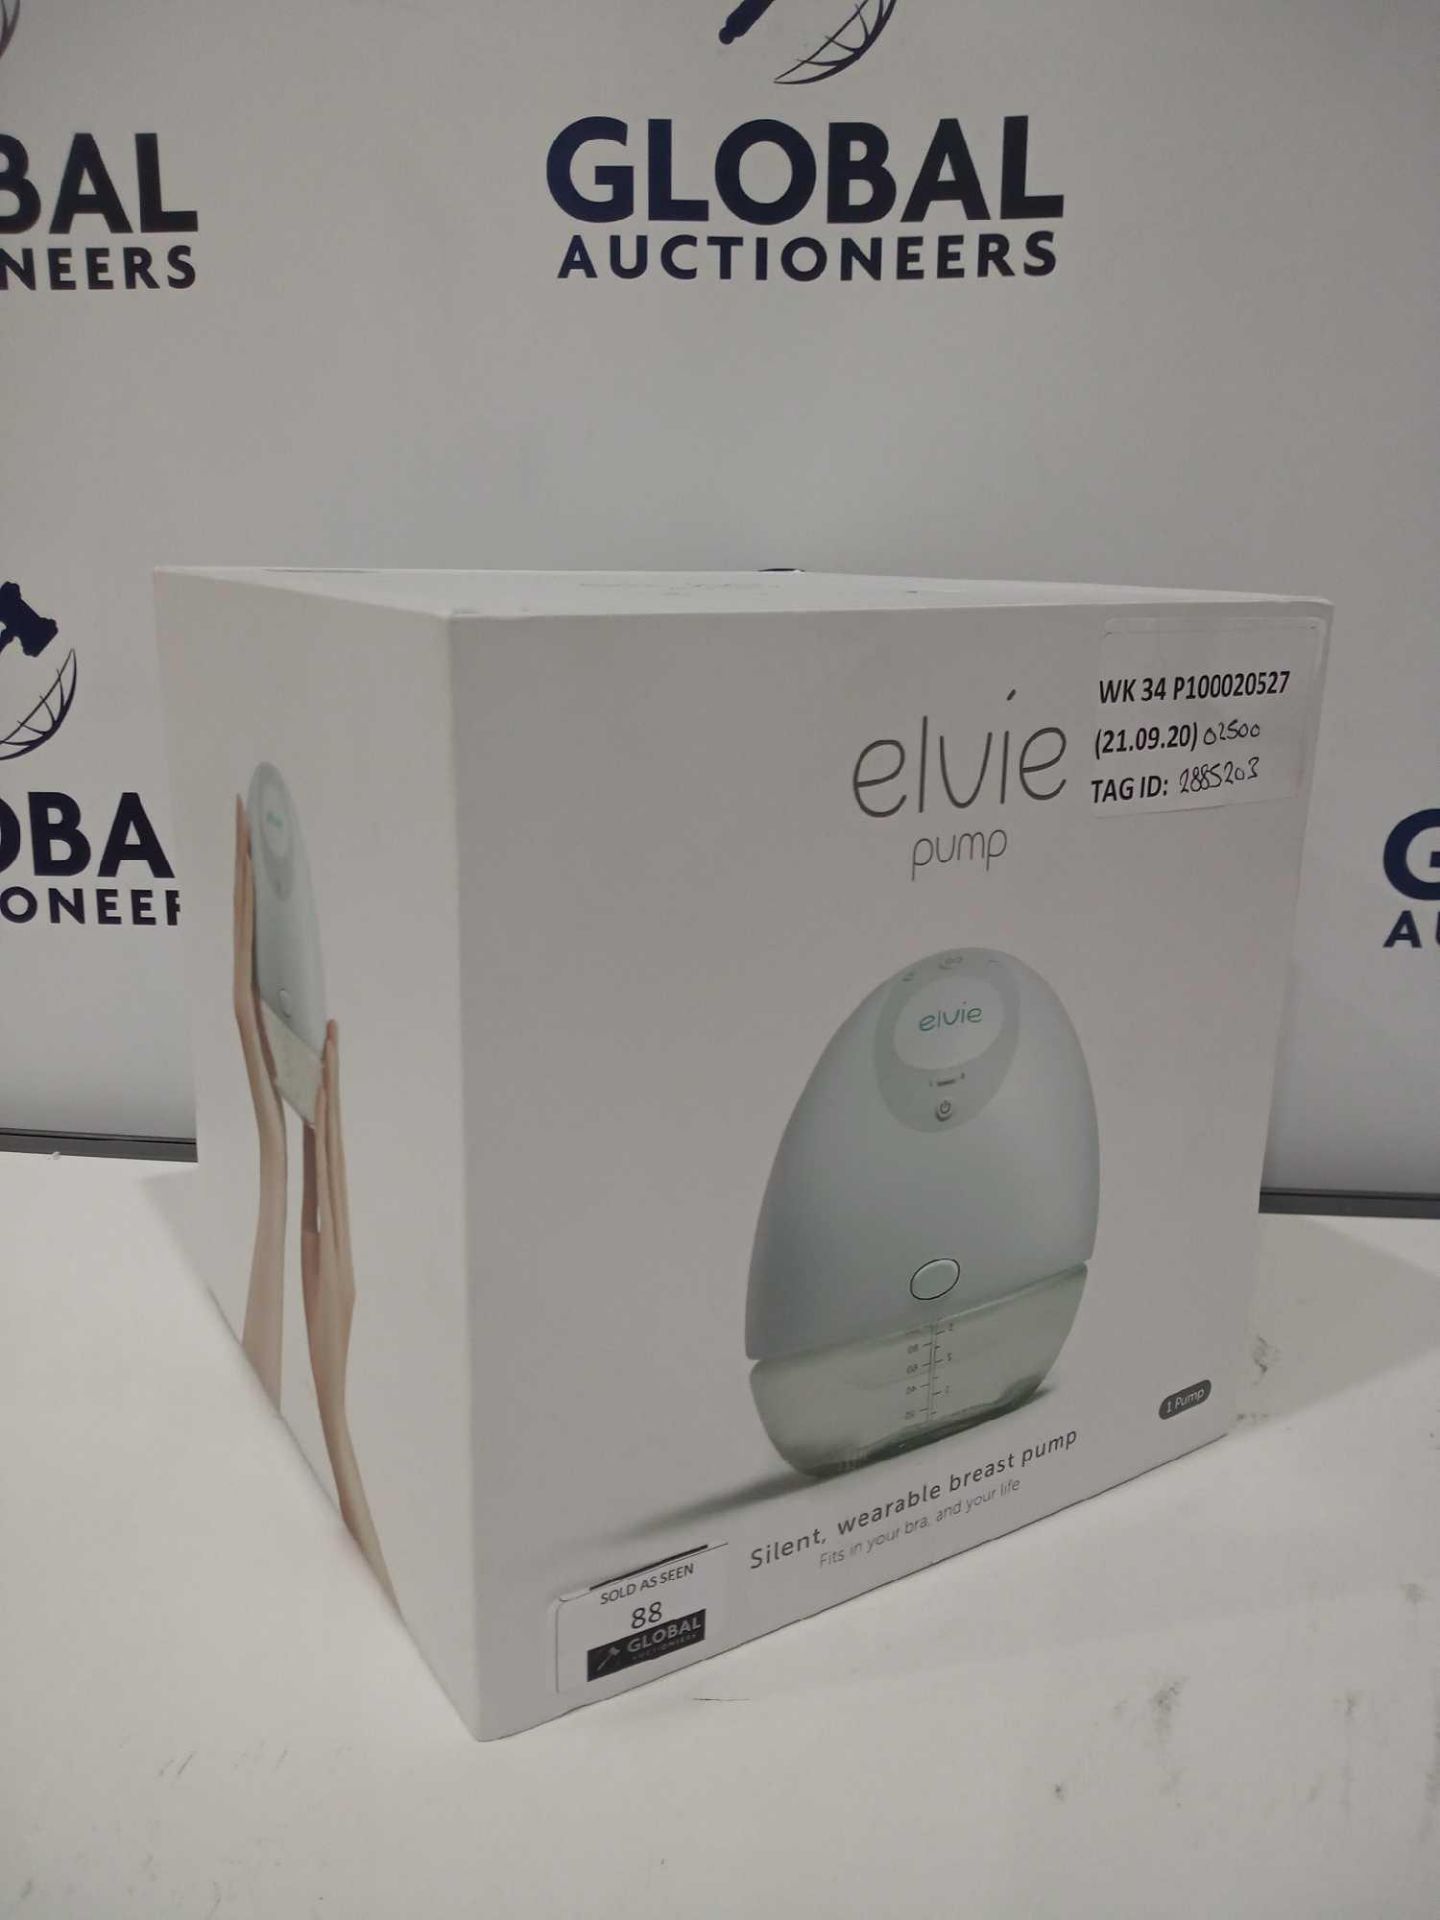 Rrp £250 Boxed Elvie Pump Silent Wearable Breast Pump In White